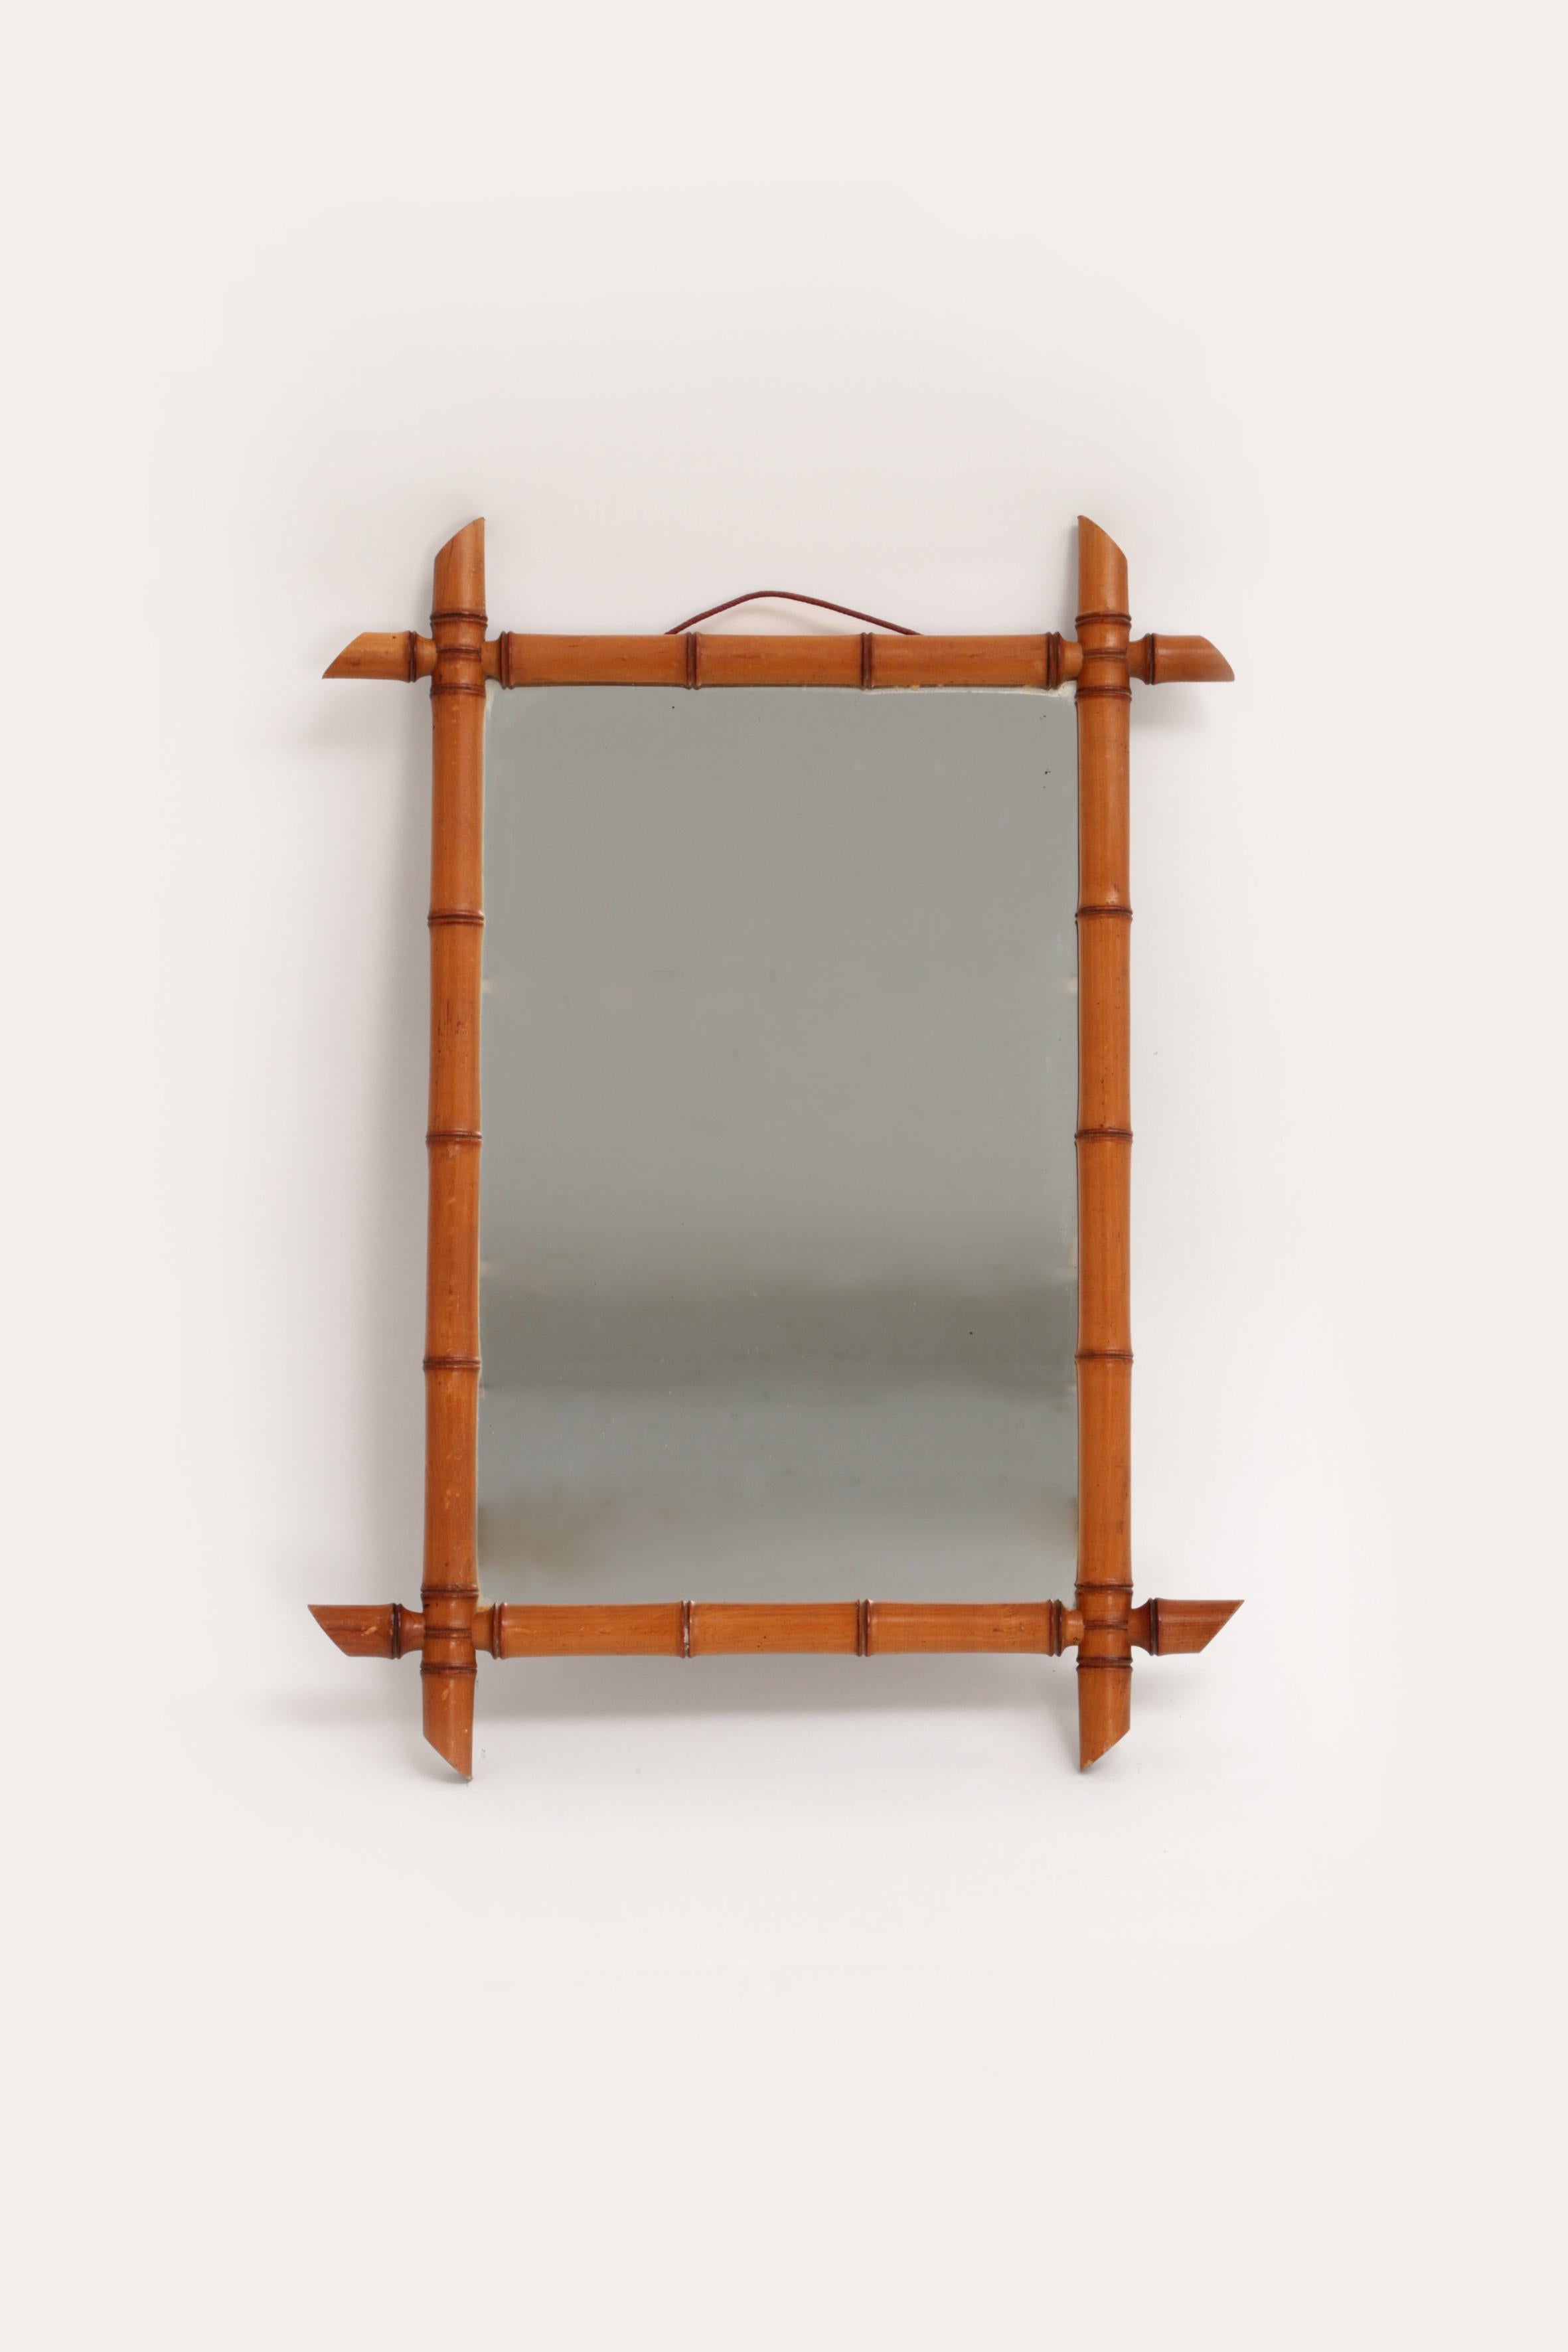 Authentic French bamboo mirror from France

With a bit of luck you can still find these mirrors in France and were made around 1920.

The appearance and patina are beautiful.
- Estimates circa 1920
- Wooden framed mirror
- bamboo mirror
-